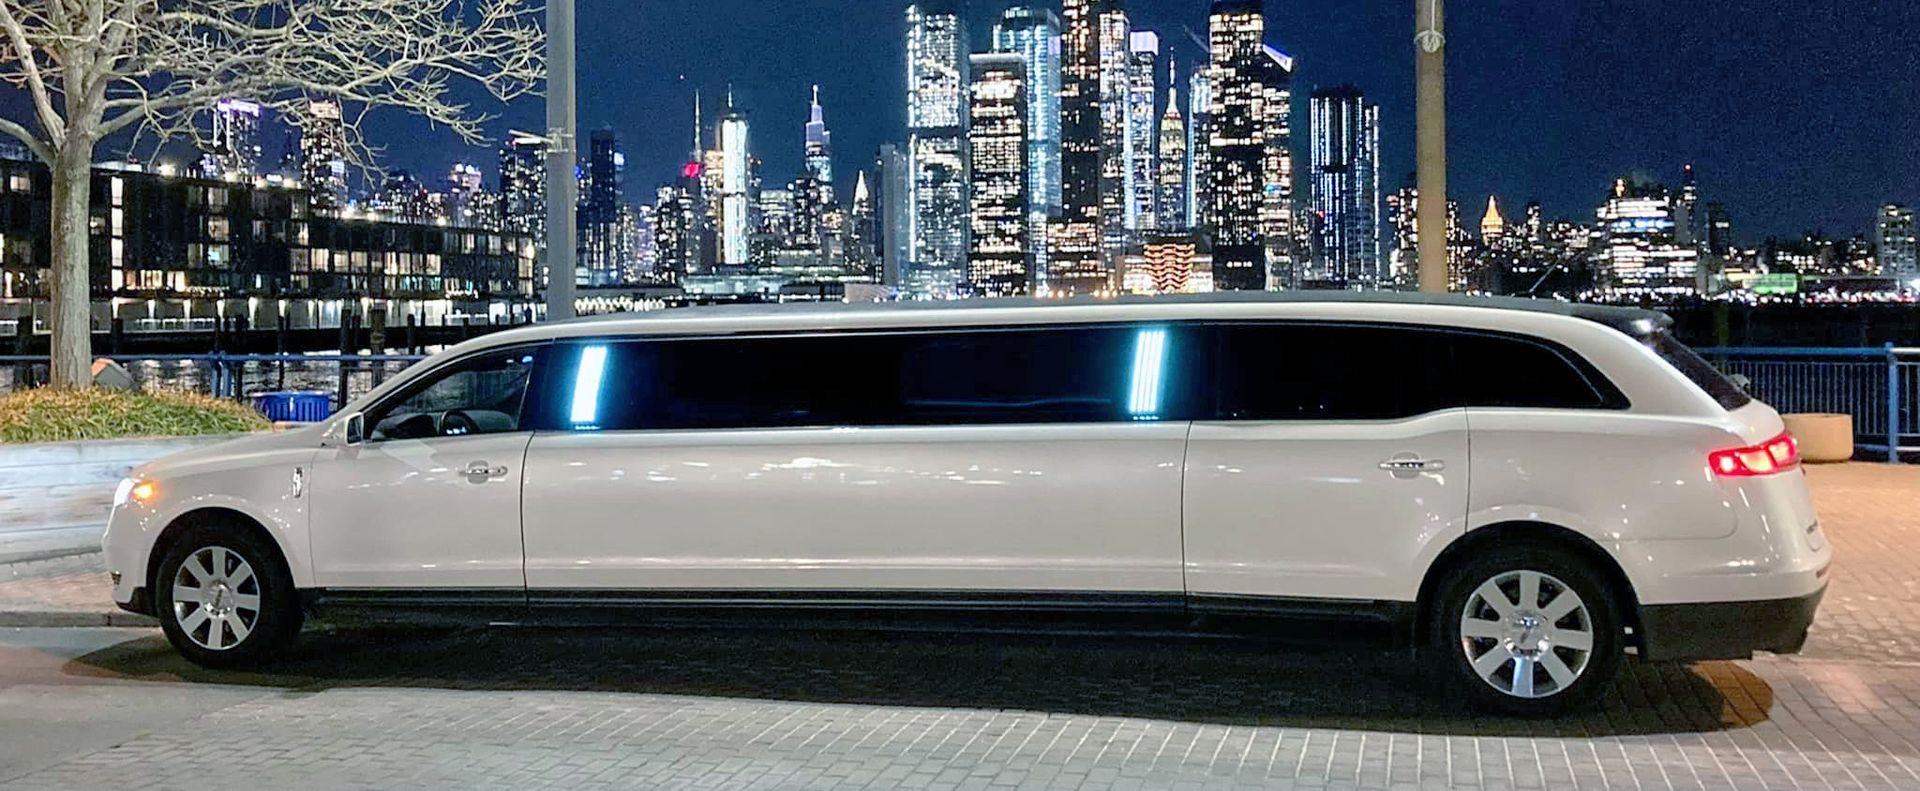 Why Brooklyn Limo Service Is the Ideal Option for Your Next Event or Journey